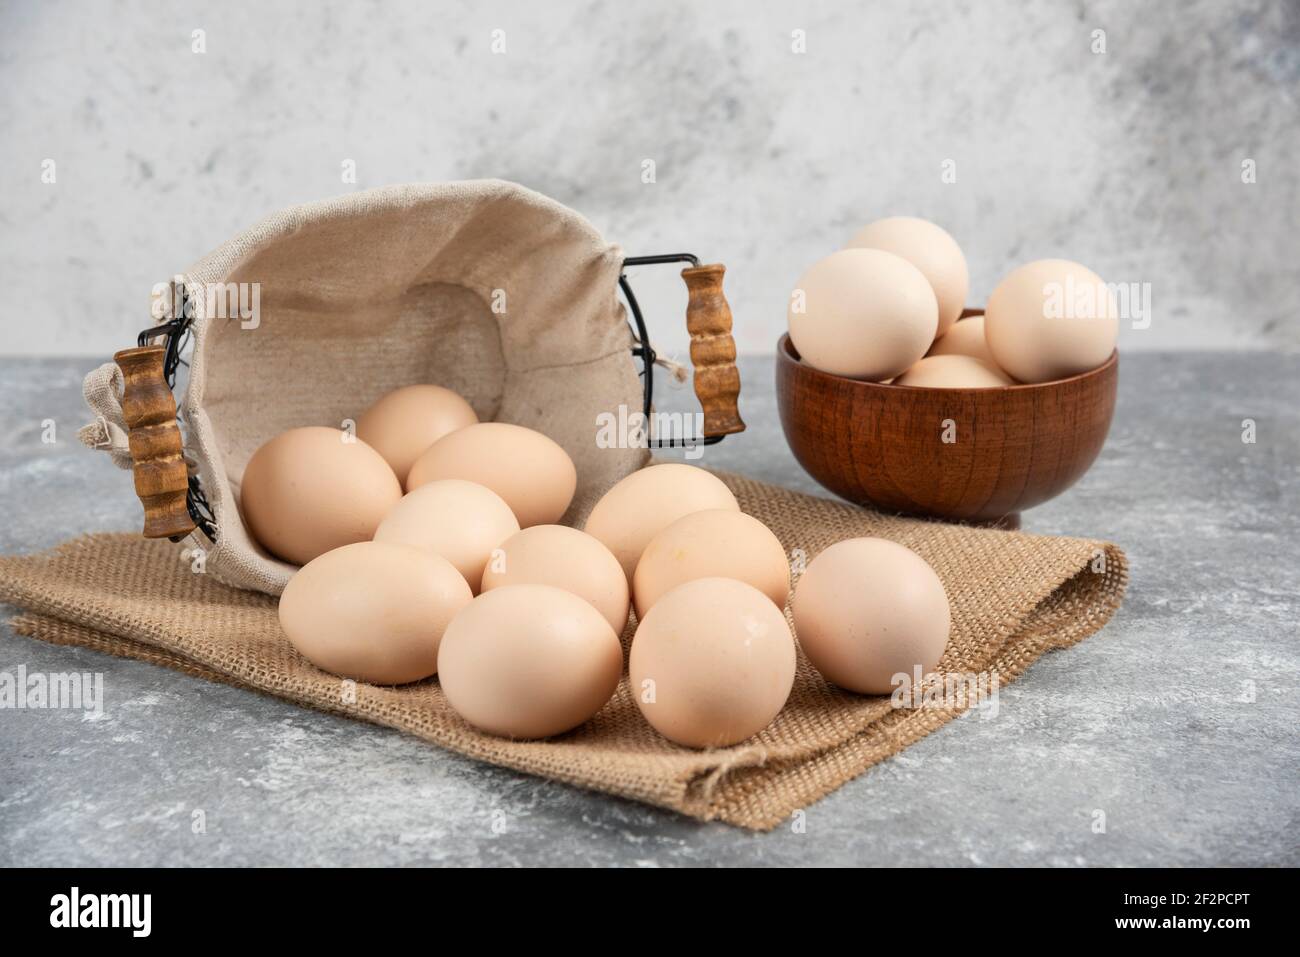 Basket and bowl full of organic fresh uncooked eggs on marble surface Stock Photo